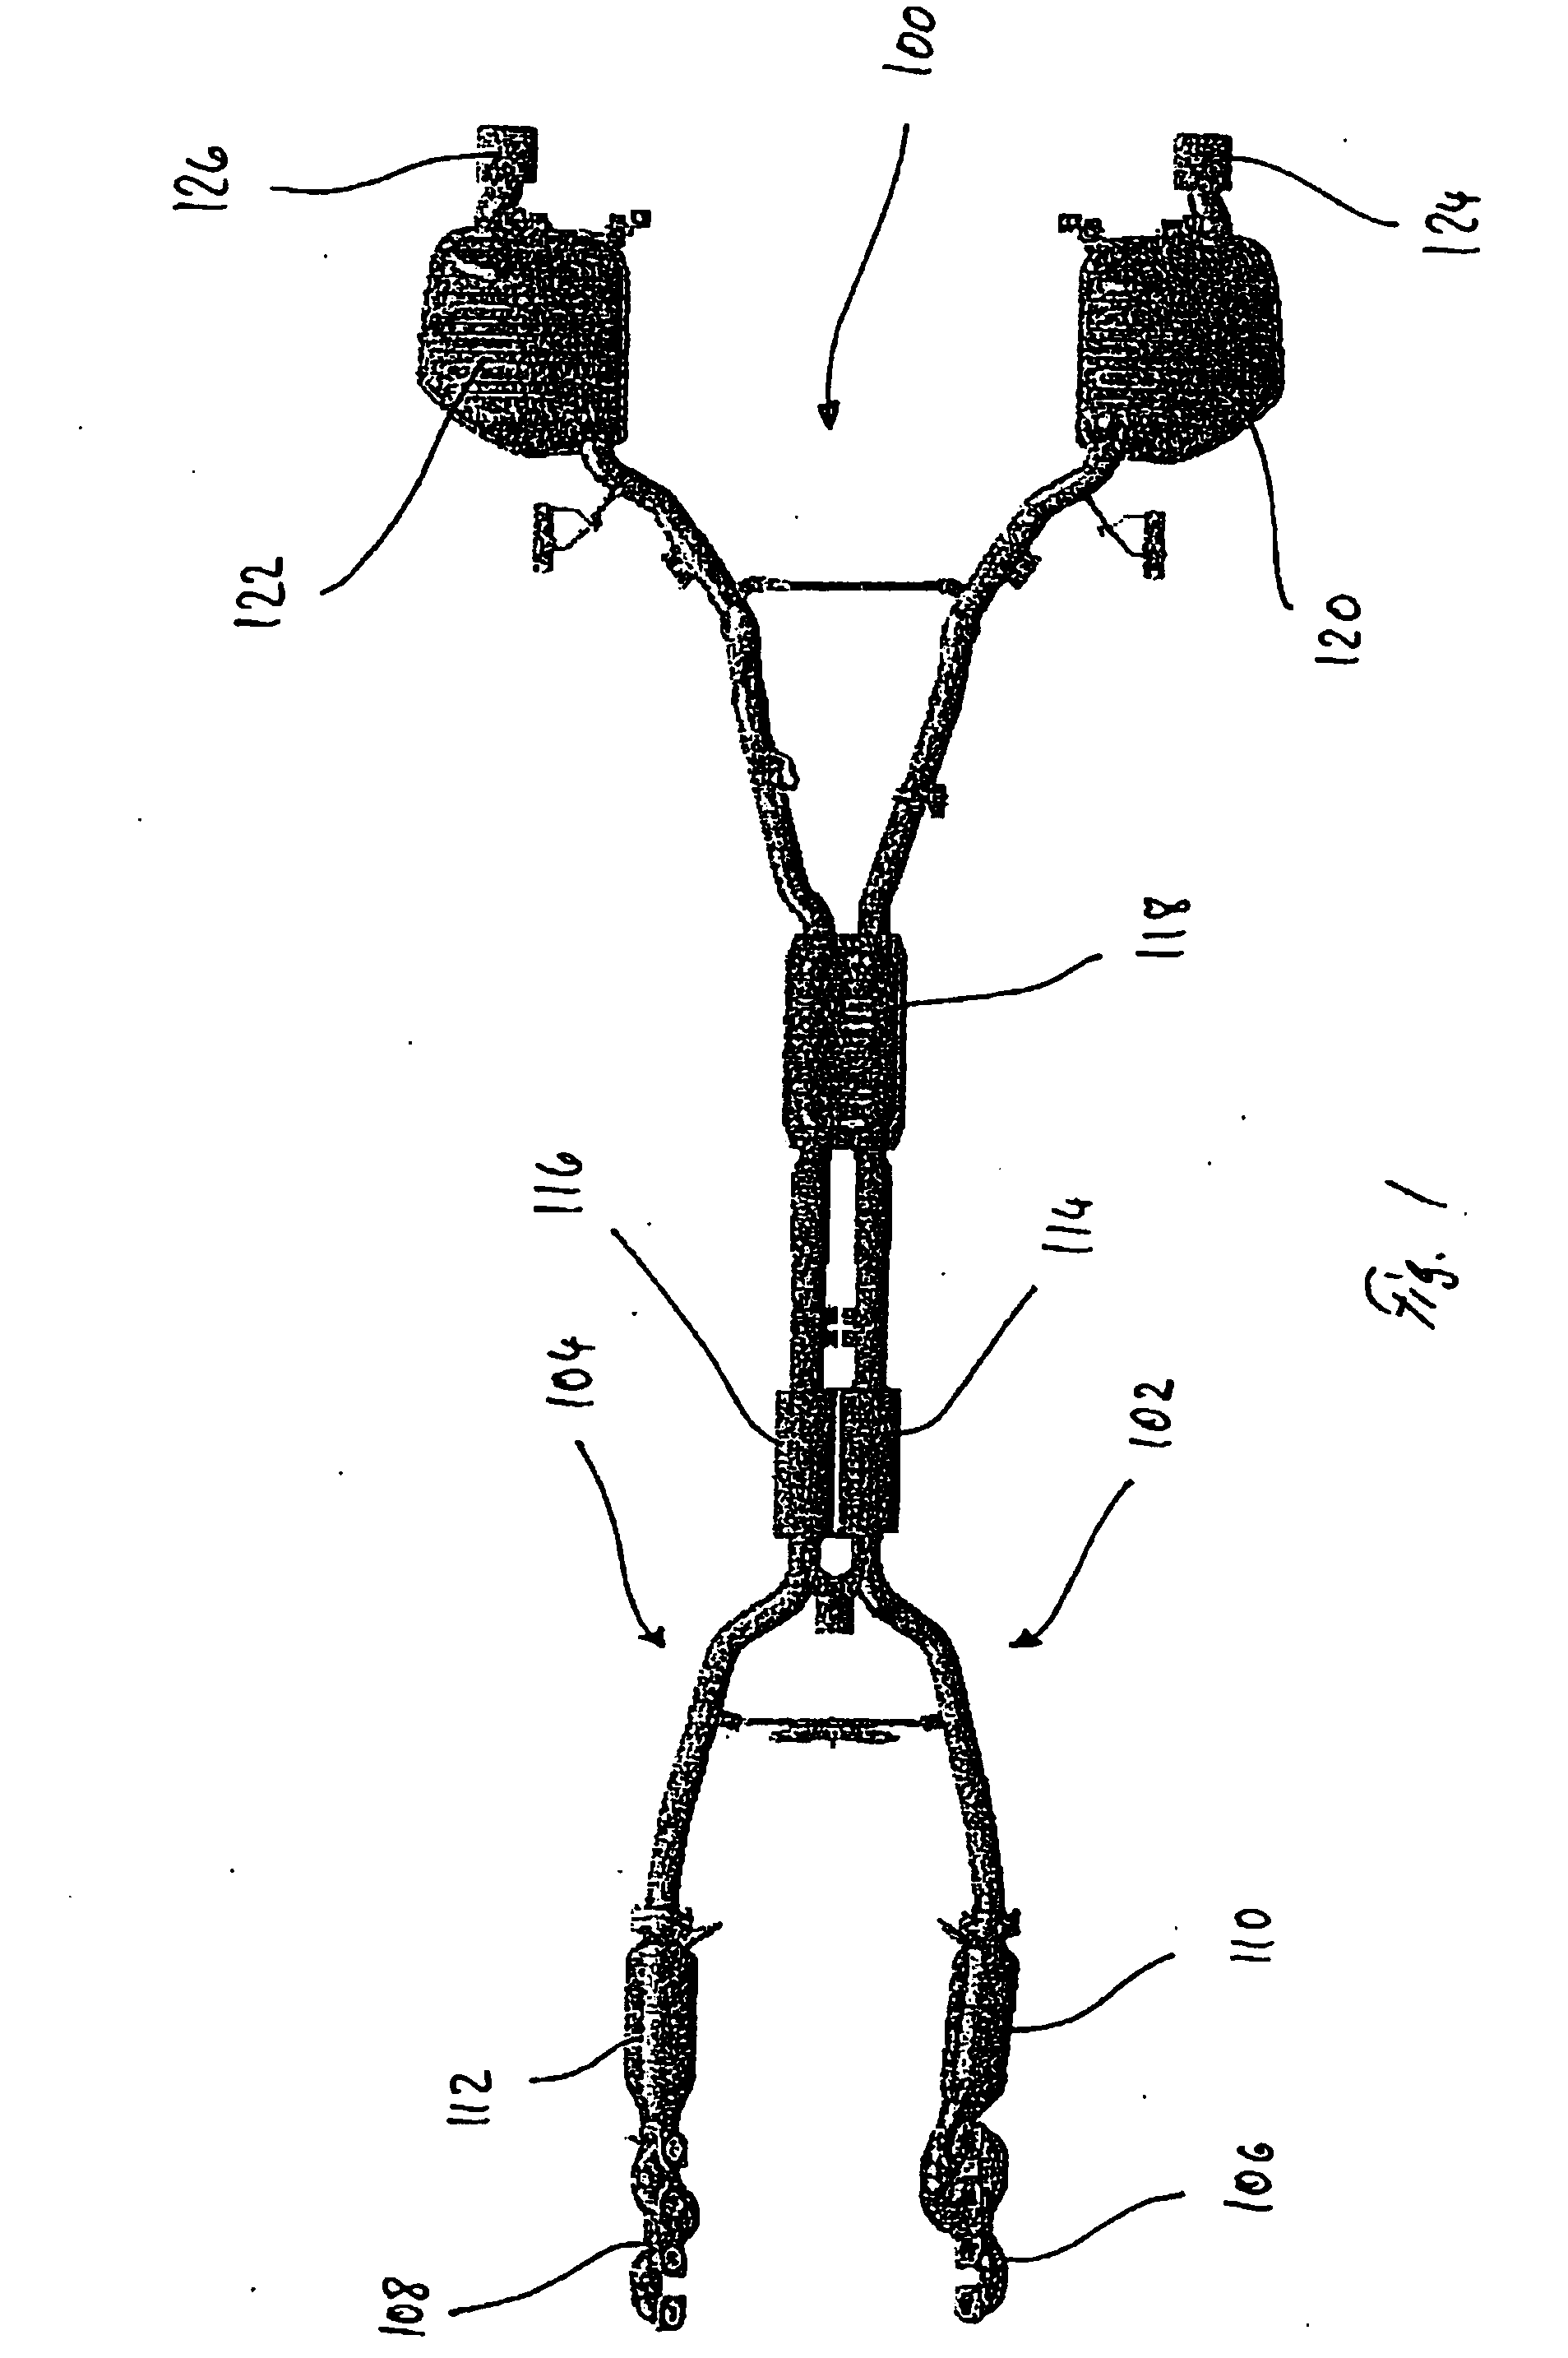 Exhaust System for an Internal Combustion Engine